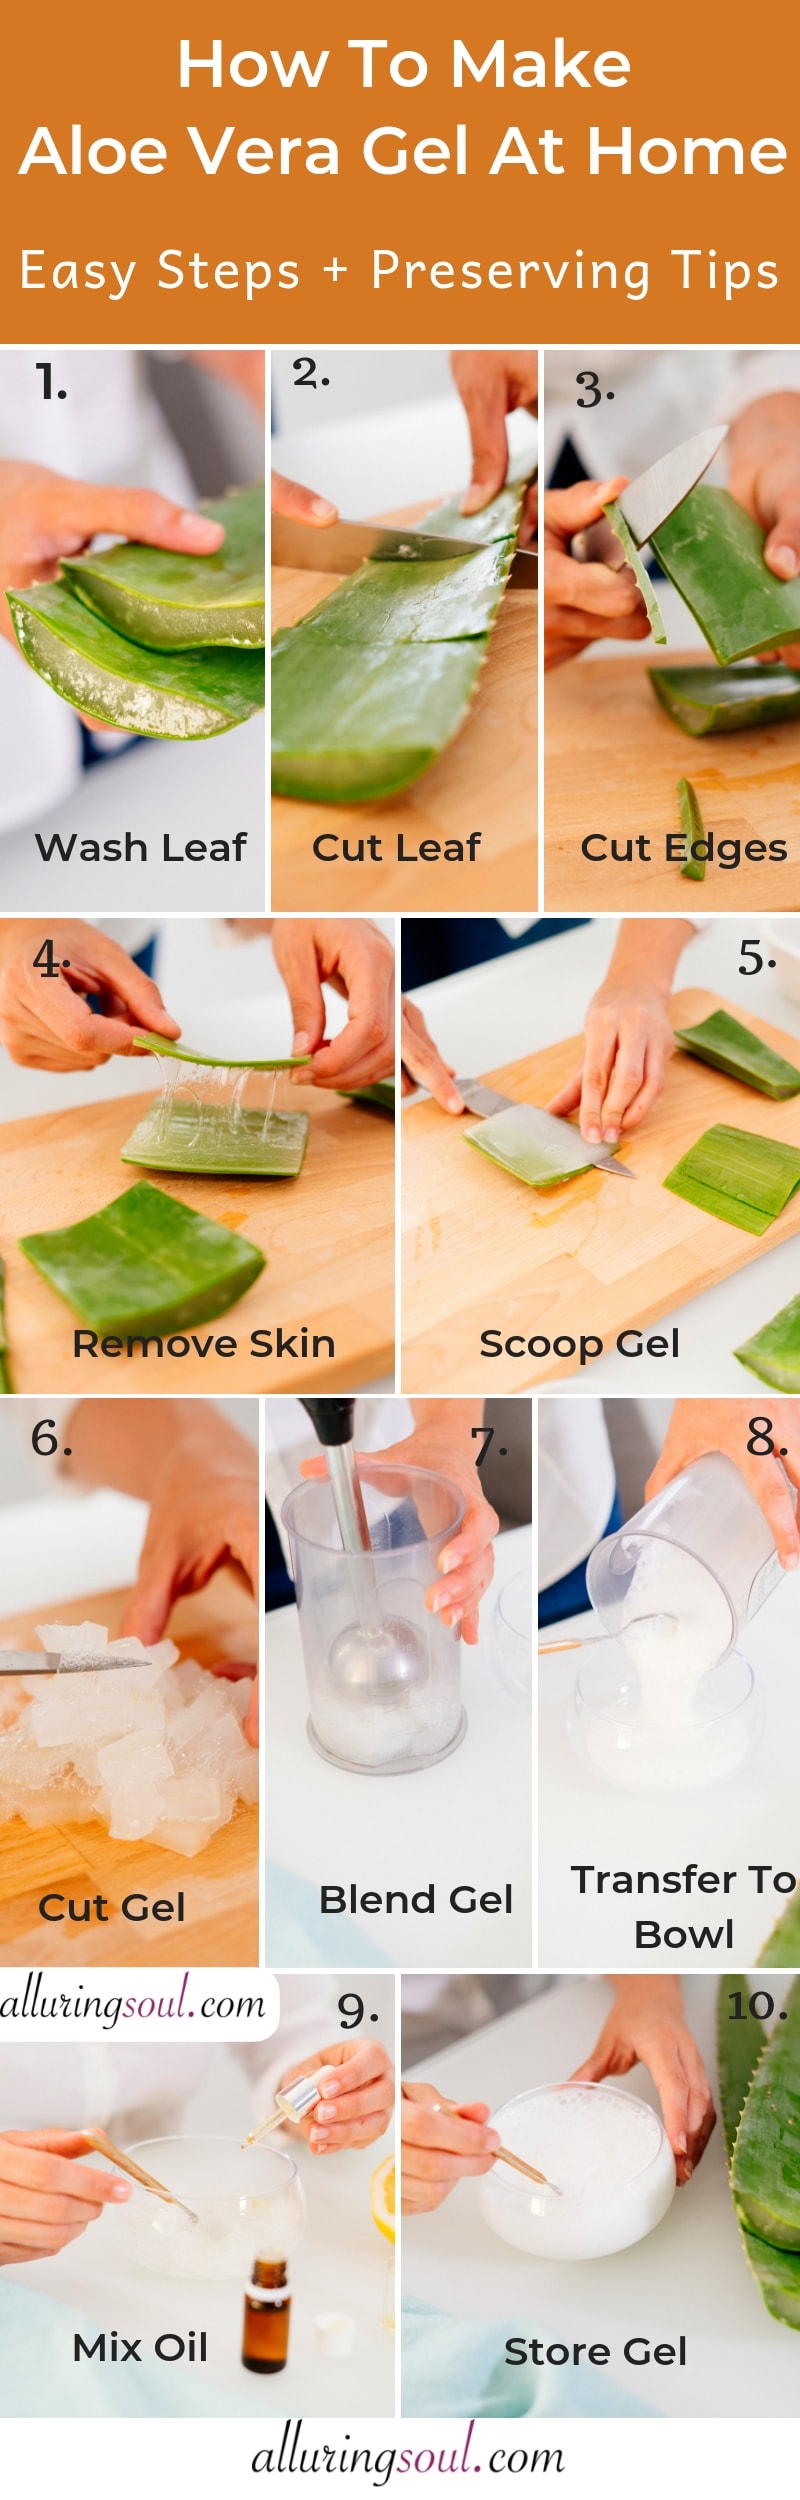 How To Make Aloe Vera Gel At Home With Pictures